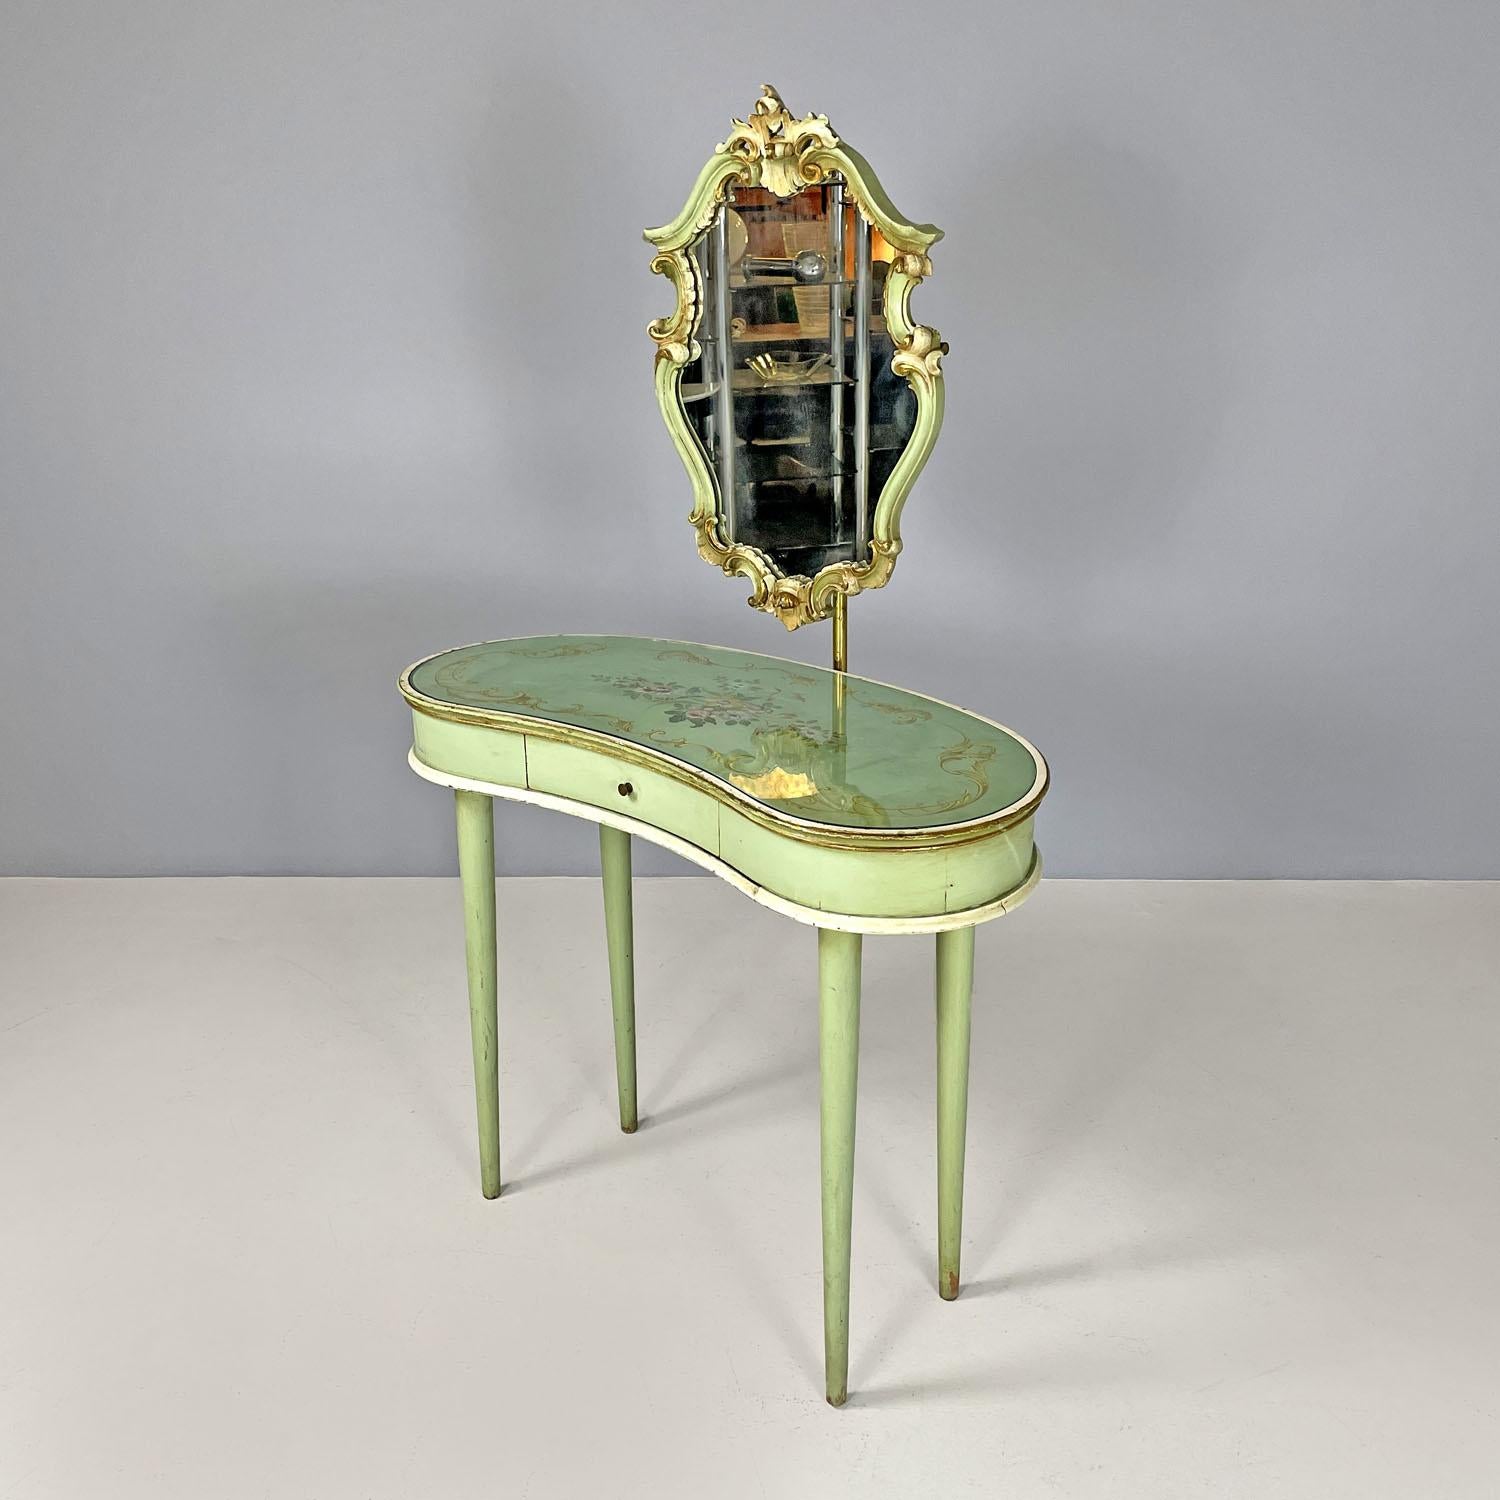 Italian Venetian style green and golden wood console with mirror, 1950s 
Wooden console with mirror. The structure is in light green lacquered wood, the glass top is oval and elongated, with the sides curving inwards. Under the glass the top